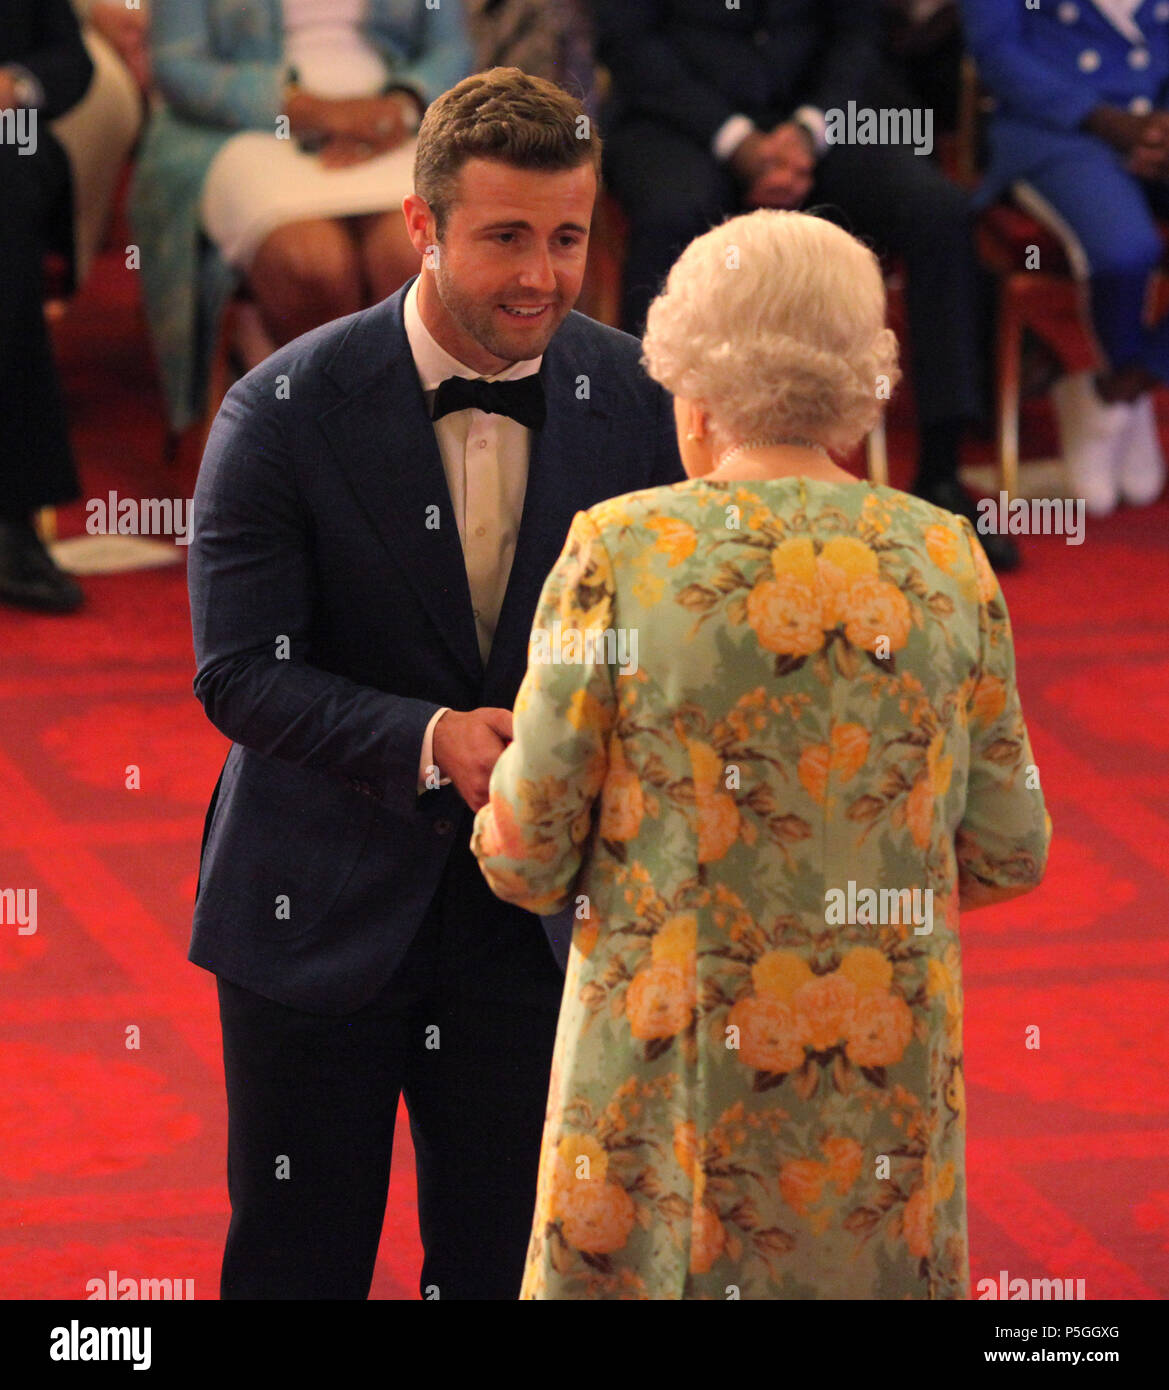 Mr. Hunter Johnson from Australia receives his Young Leaders Award from Queen Elizabeth II during a ceremony in the Ballroom at Buckingham Palace. Stock Photo